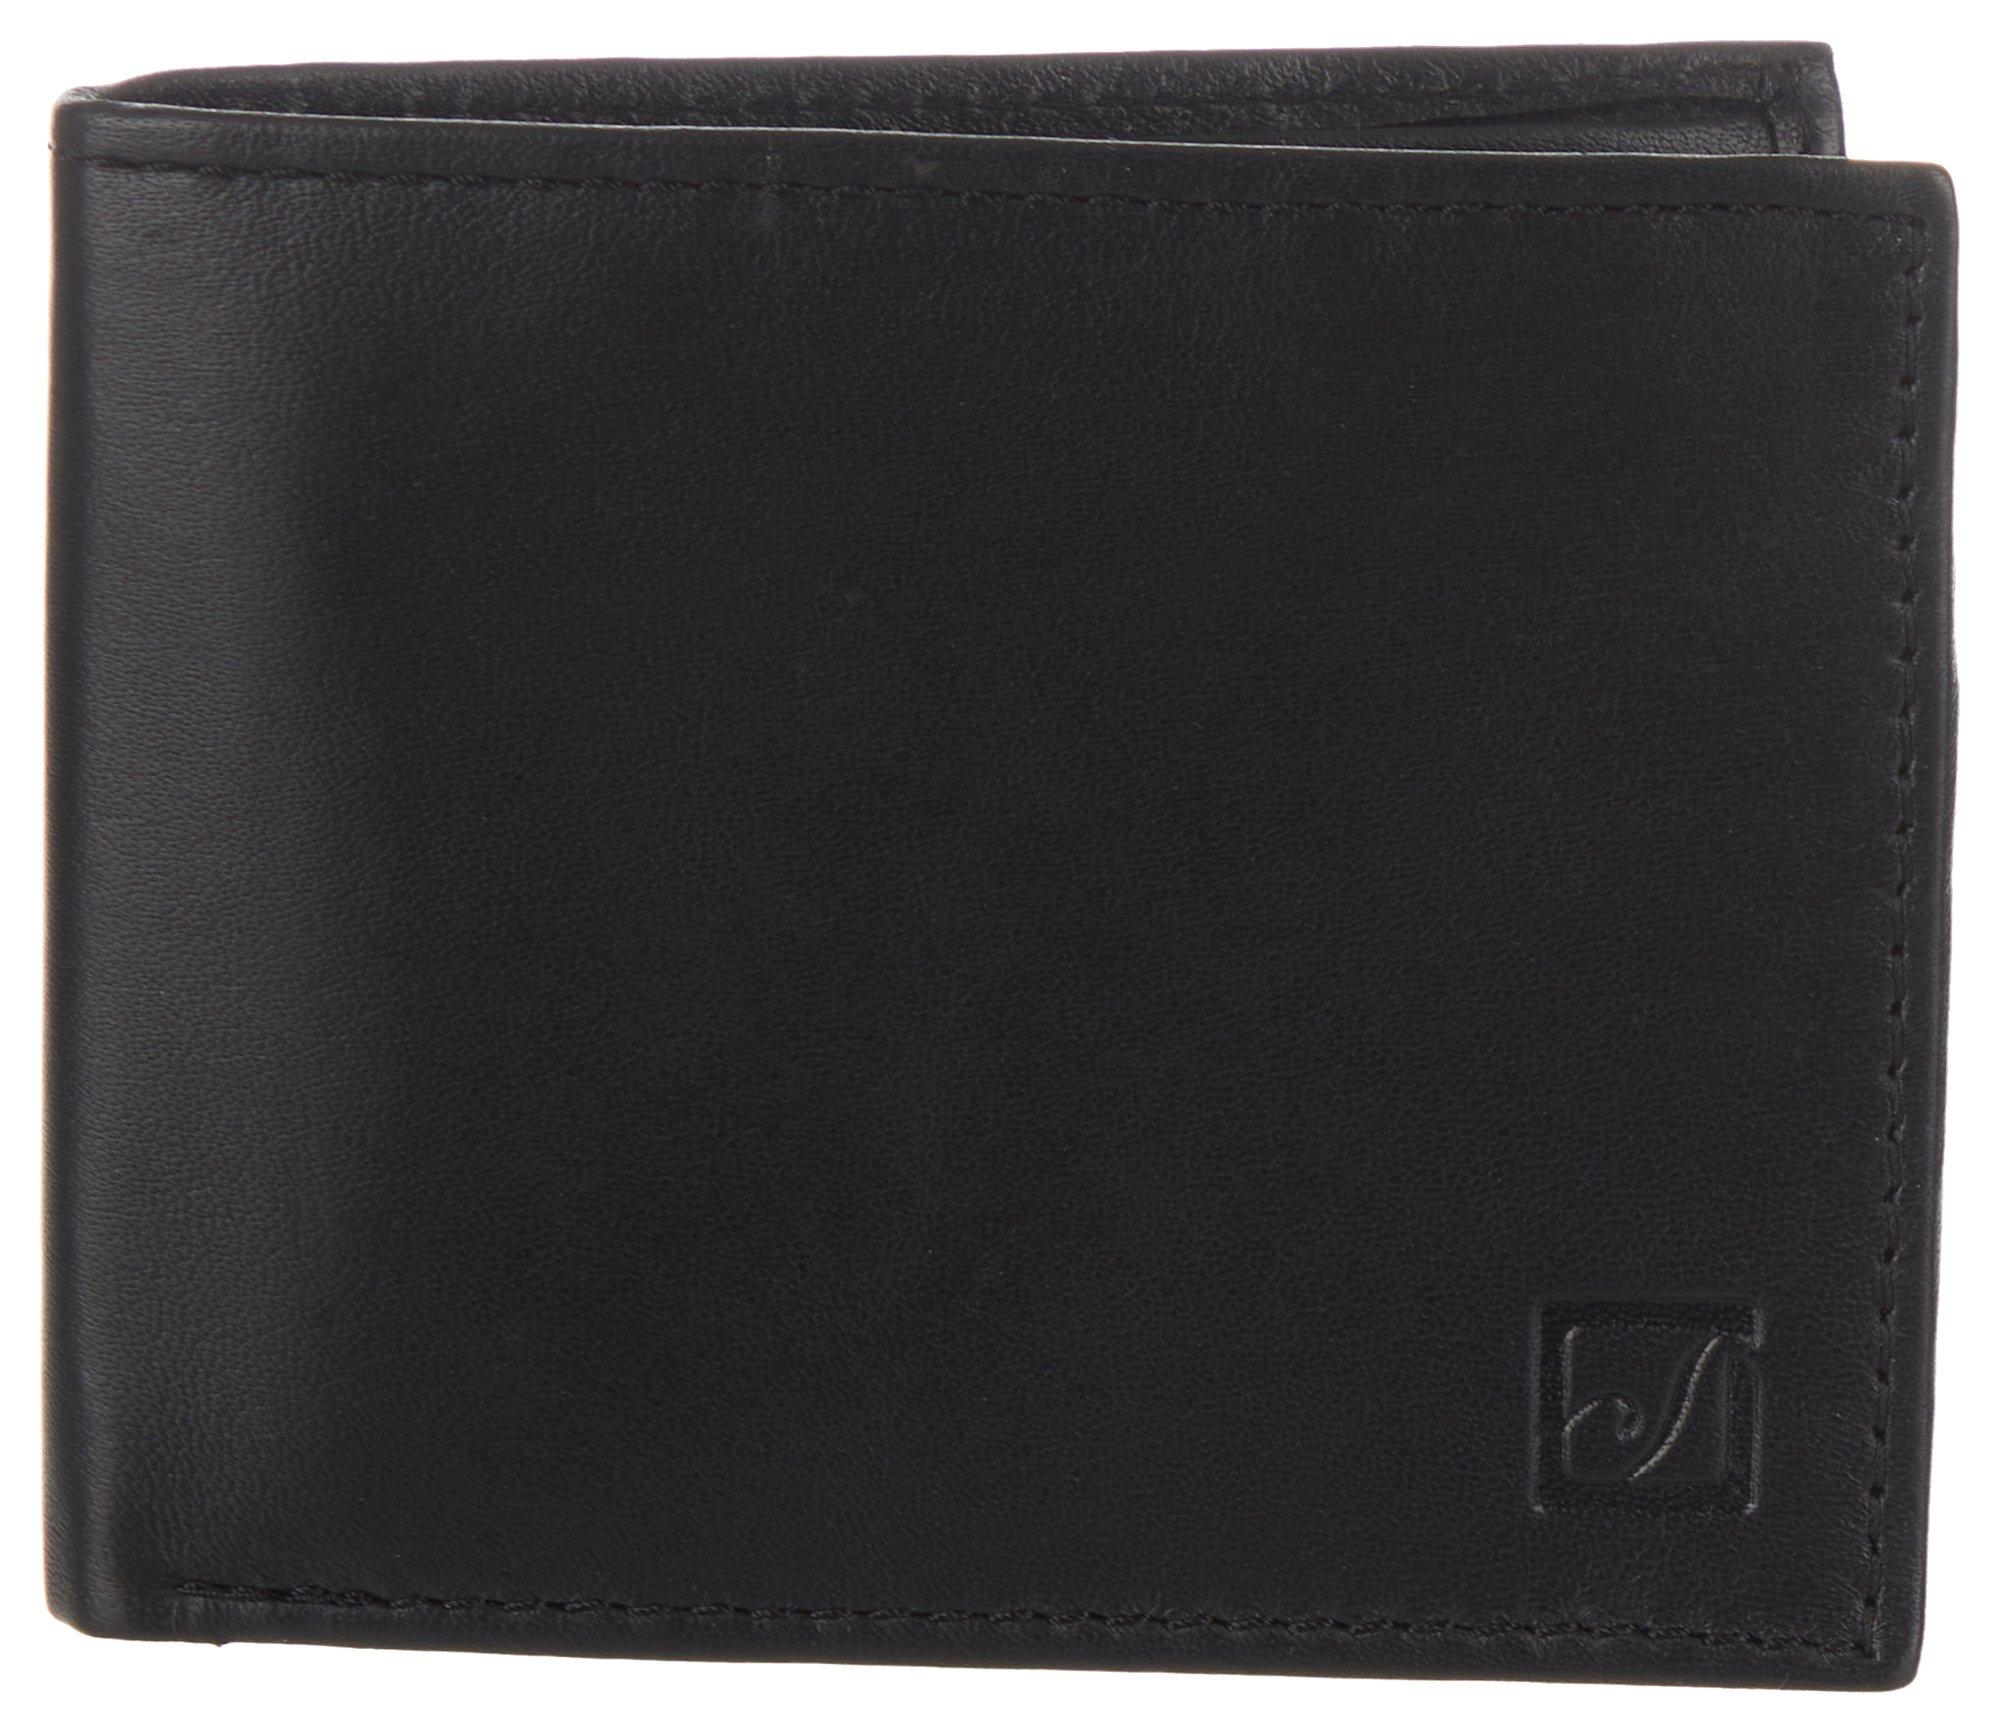 Stone Mountain Mens RFID Genuine Leather Passcase Wallet